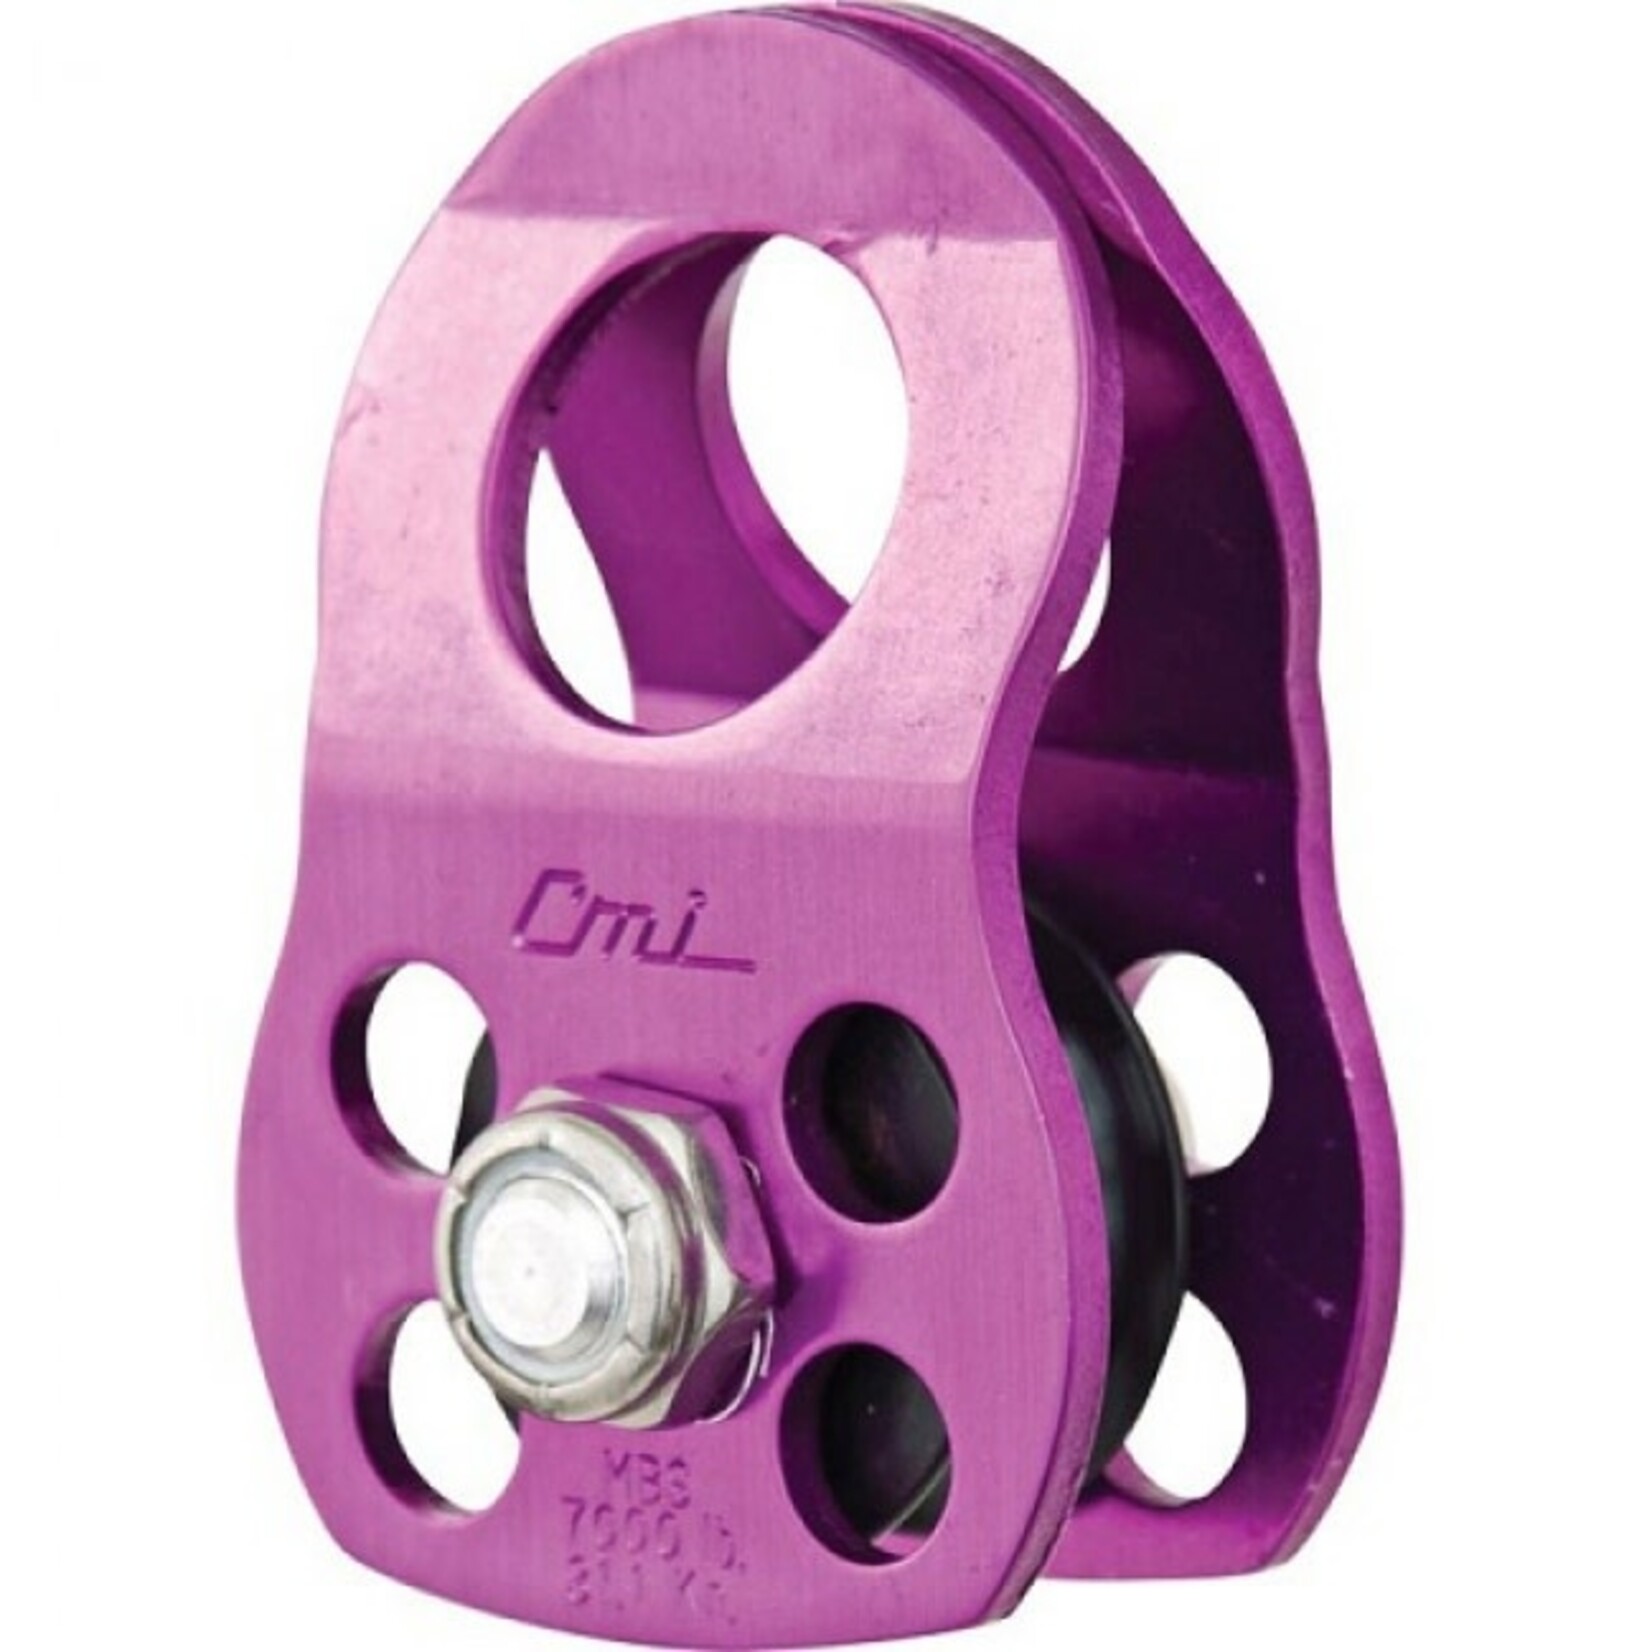 CMI Micro Pulley for 1/2in Rope - Nylon Sheave